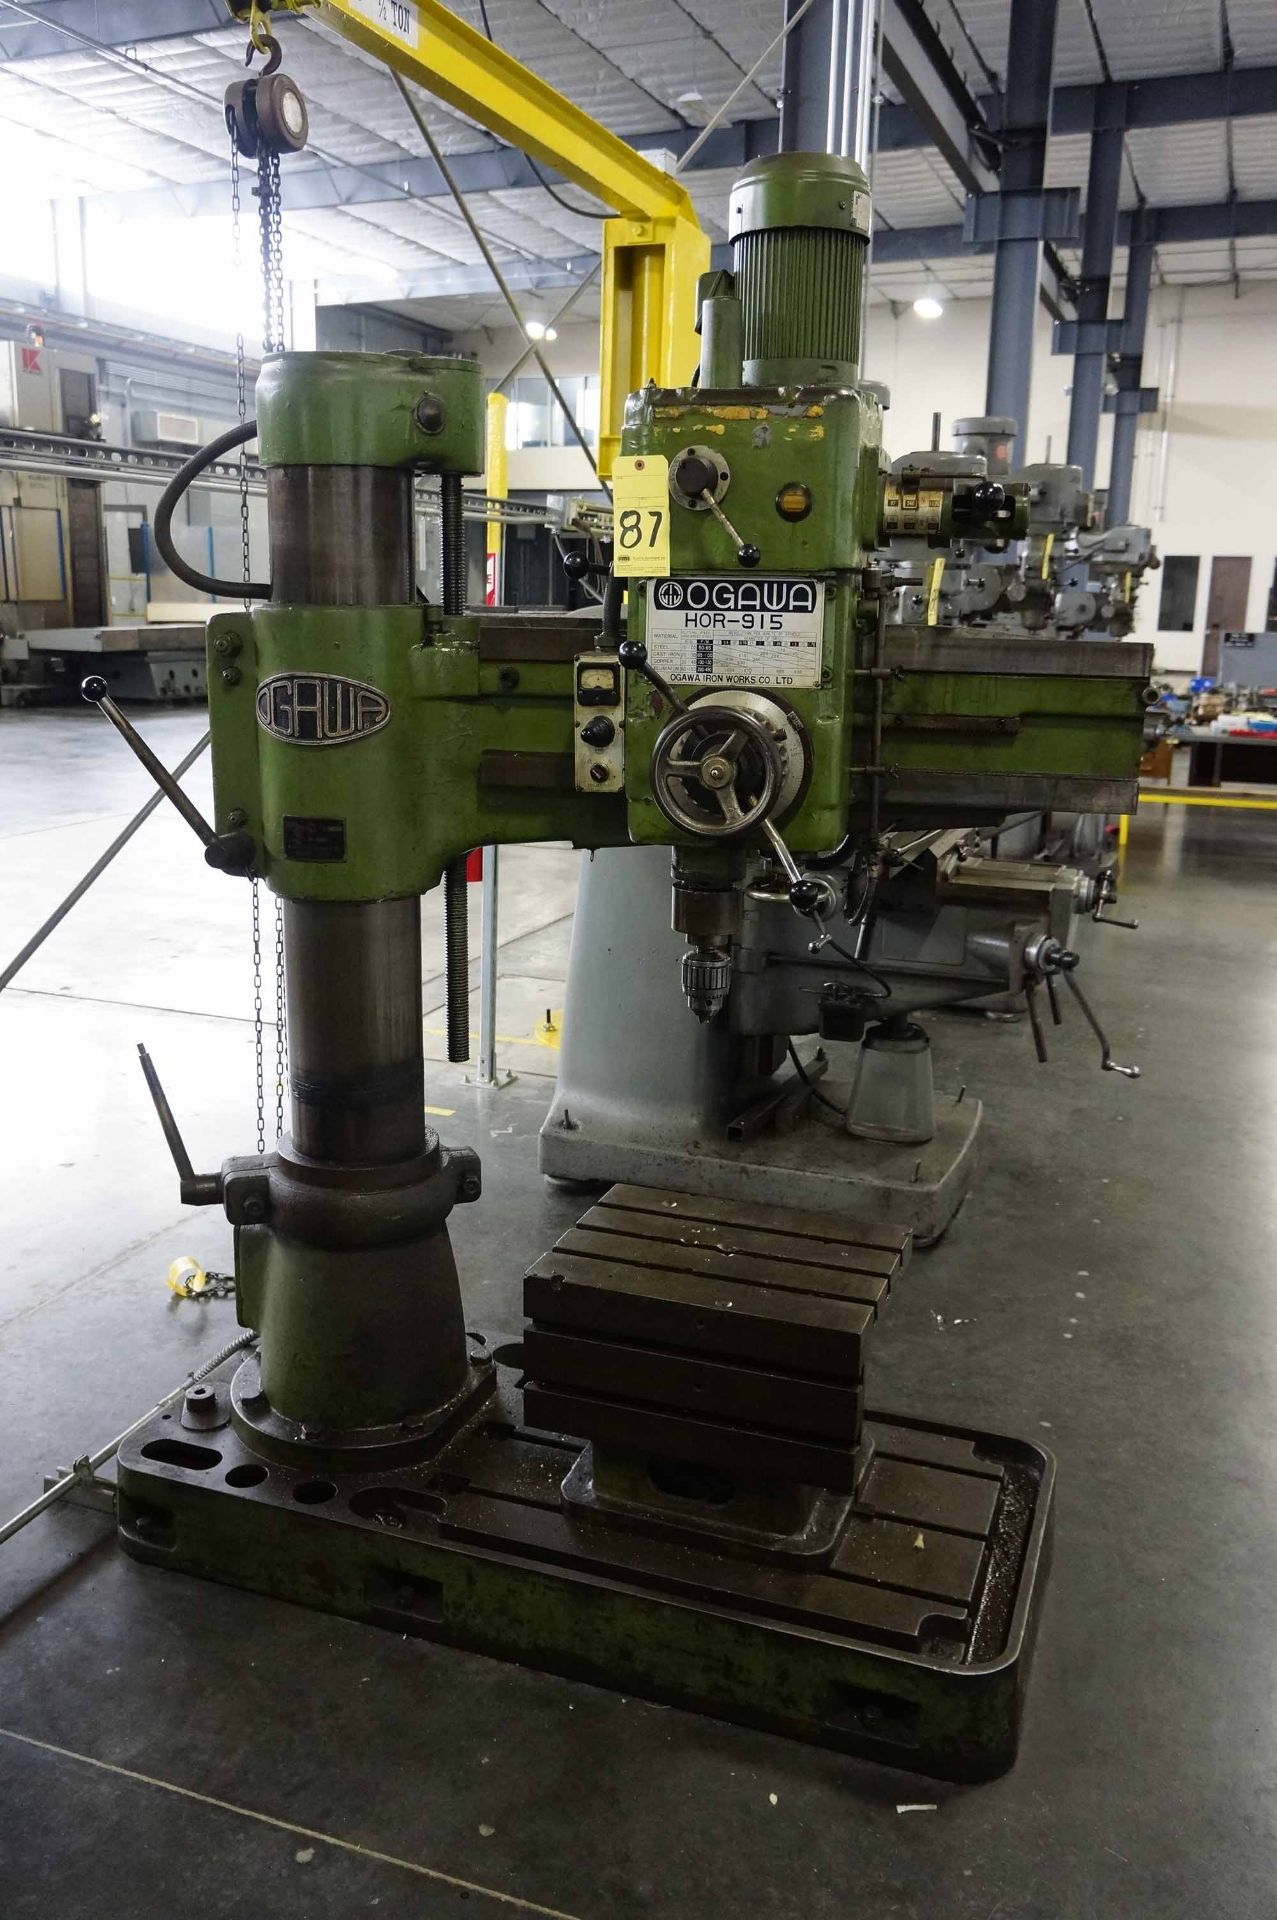 RADIAL ARM DRILL, OGAWA 3' X 9" MDL. HOR-915, spds: 145-1524 RPM, box table